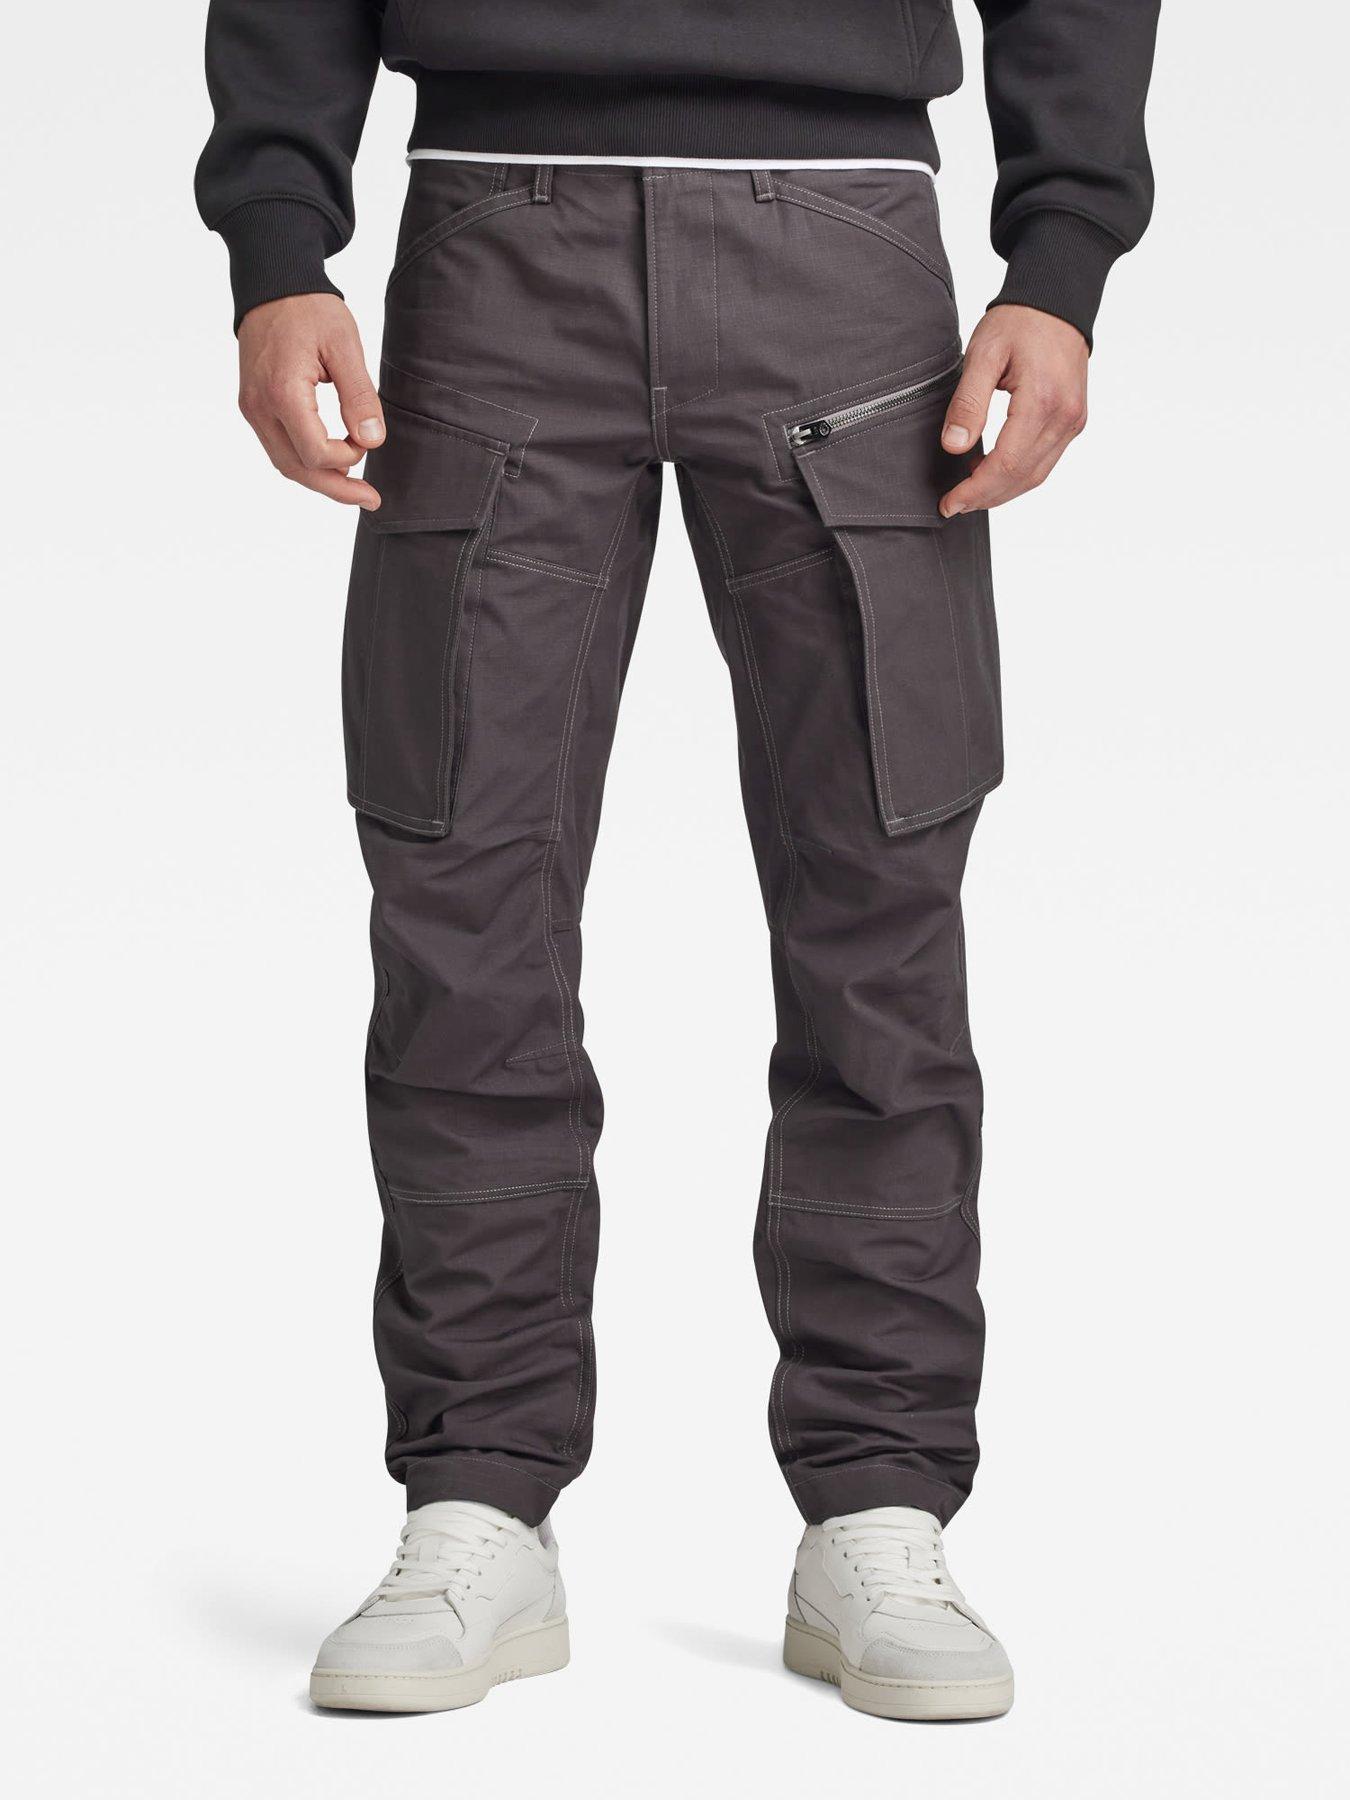 G-Star RAW Rovic Airforce Relaxed Trousers - Men | Relaxed trousers, Suit  and tie, G-star